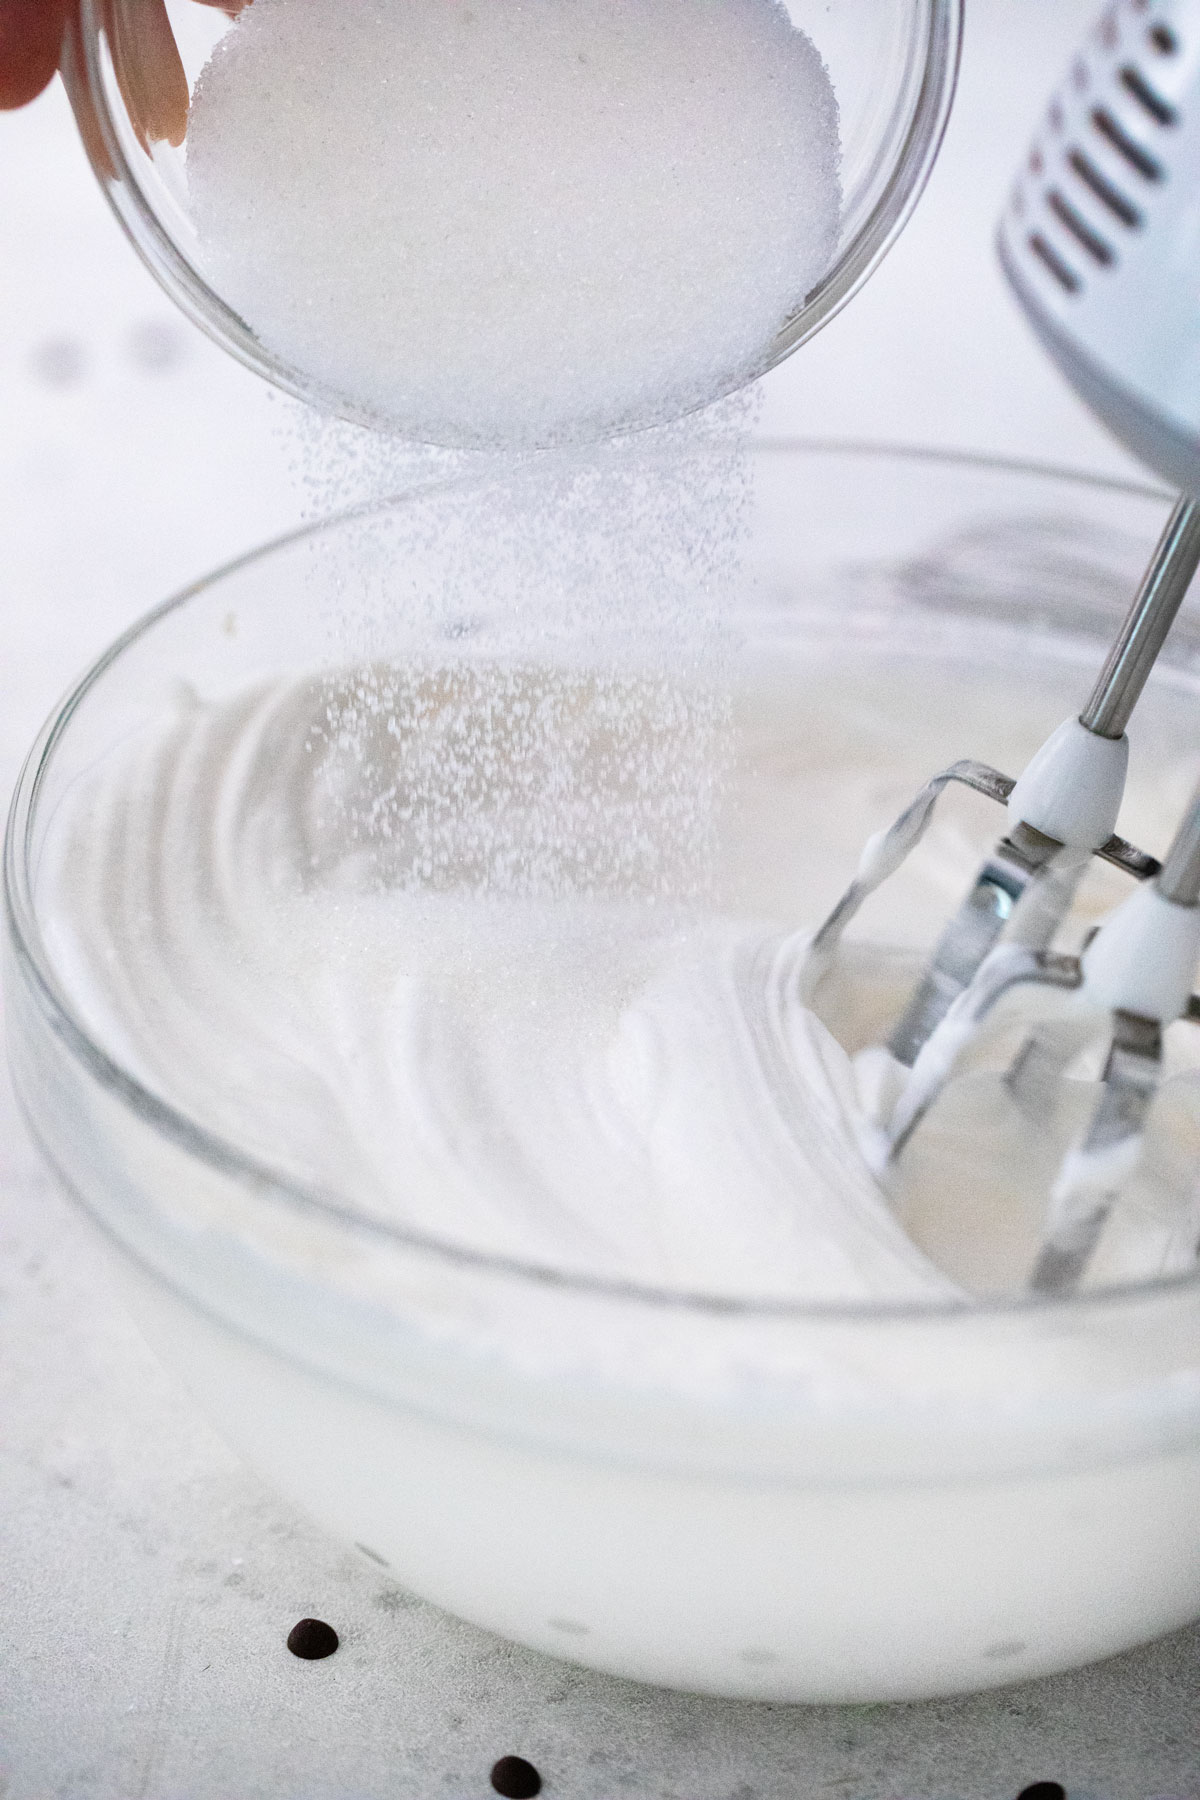 Sugar being poured into egg white mixture in a glass bowl with an electric mixer in action.